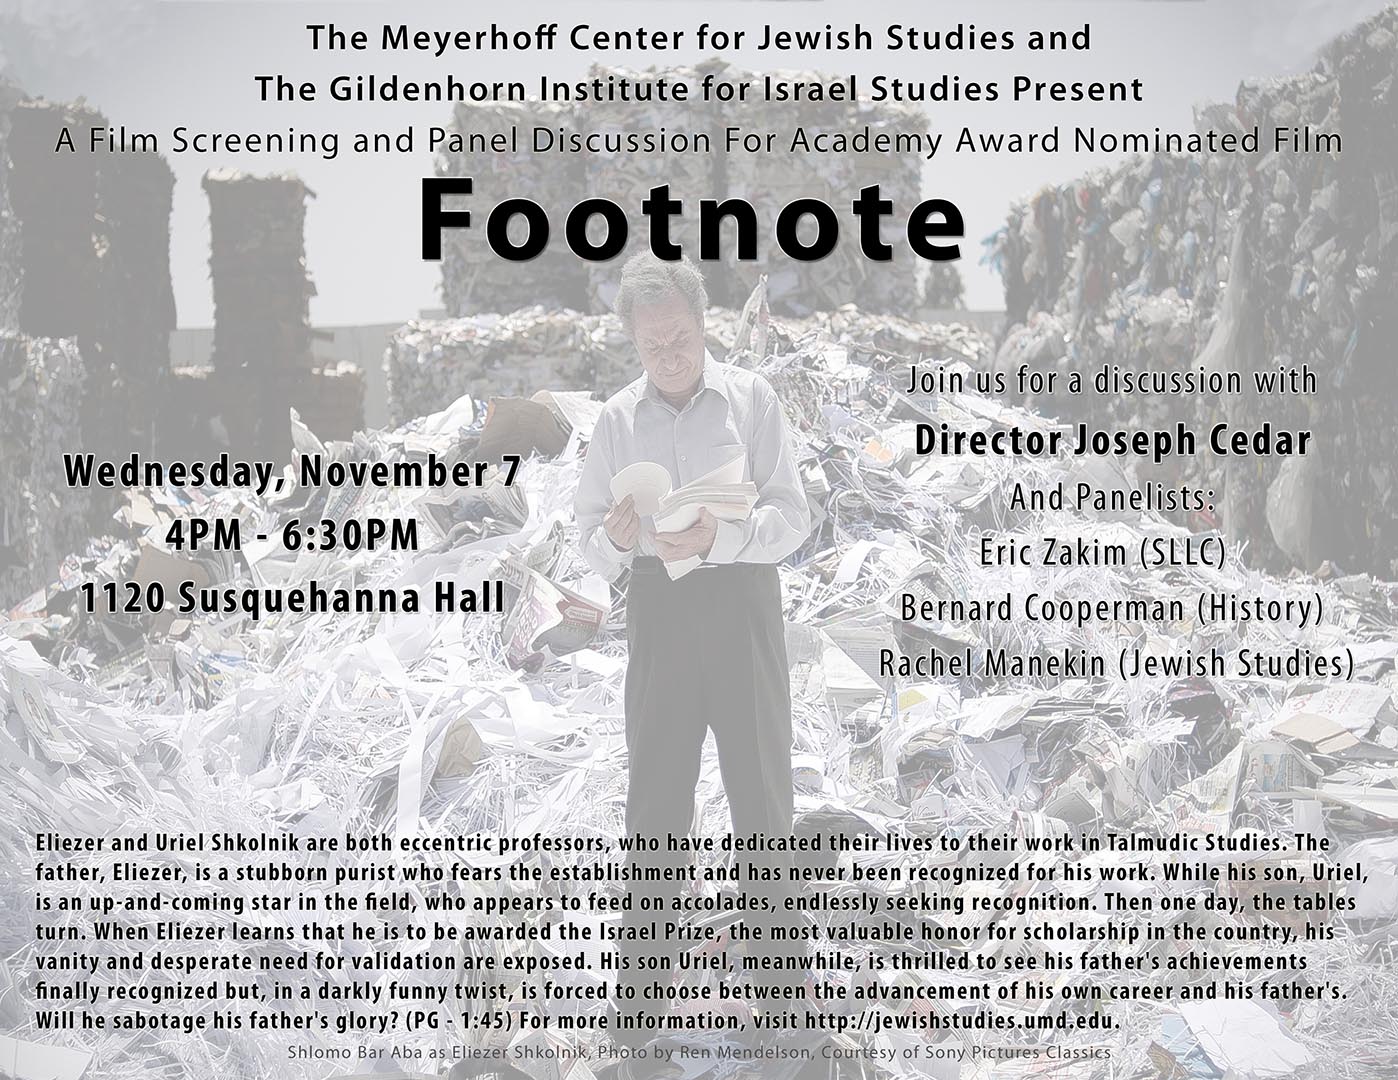 Footnote: A Film Screening and Panel Discussion with Director Joseph Cedar